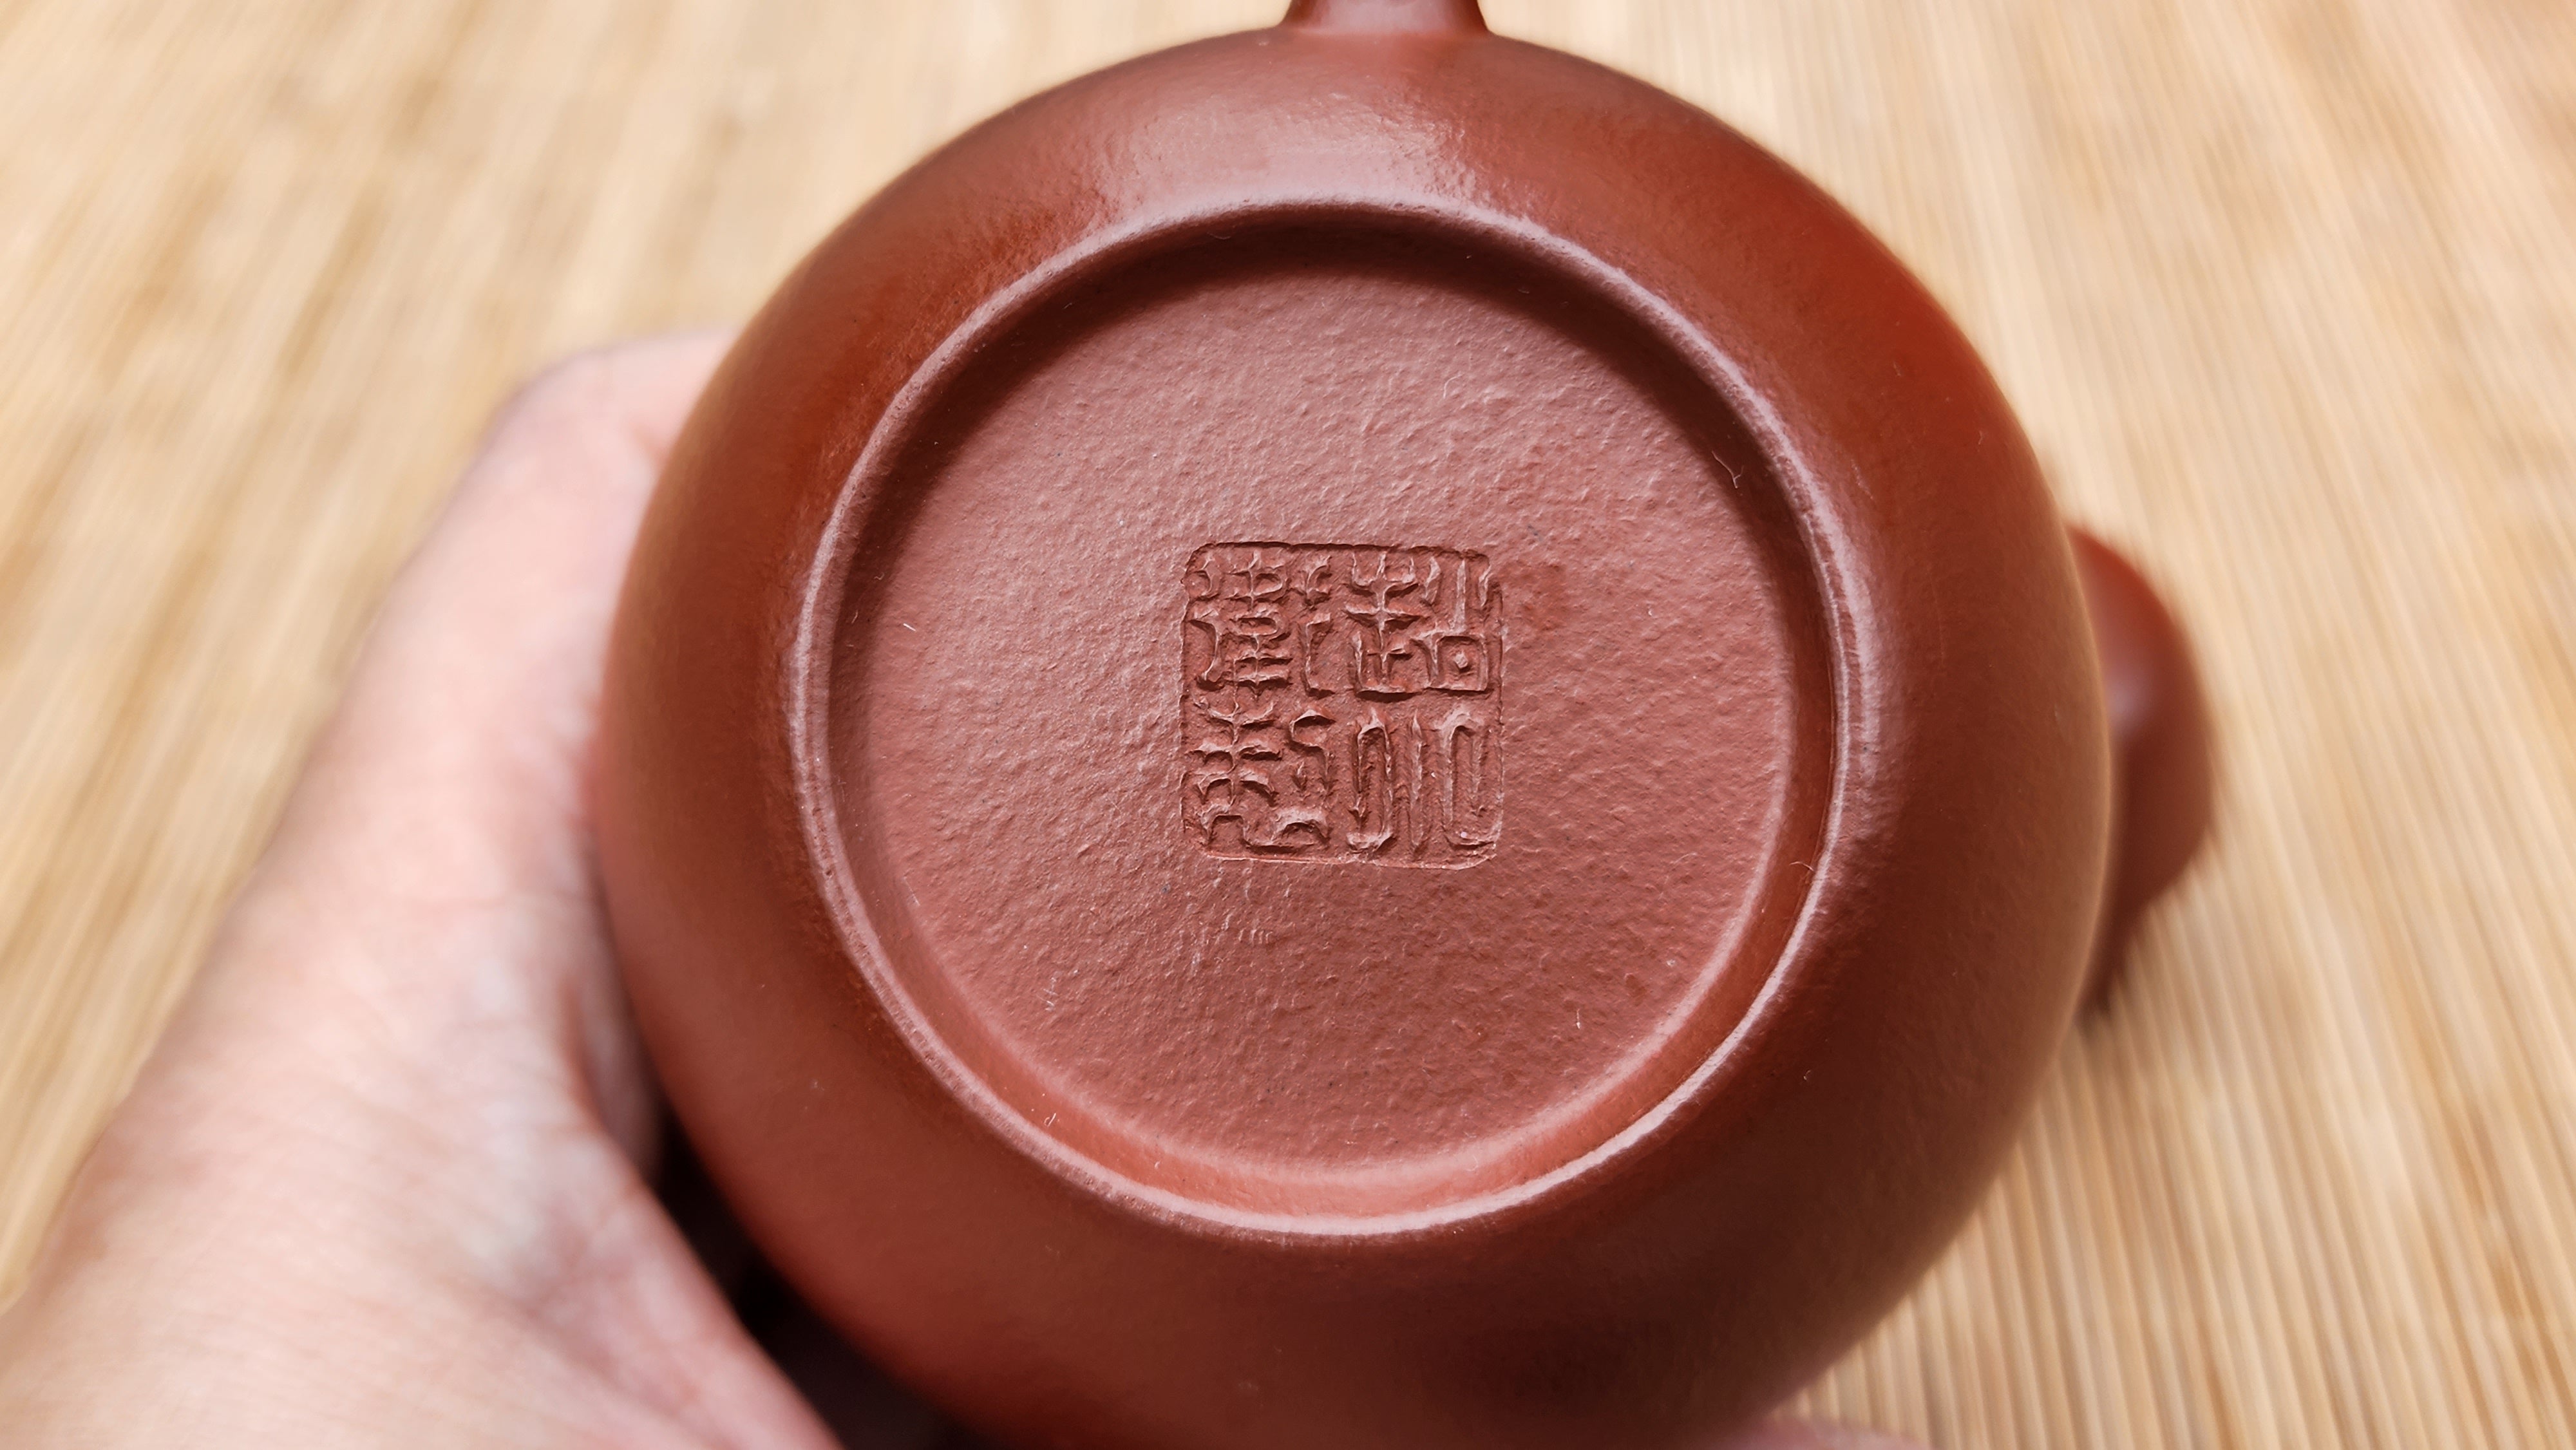 Si Ting 思亭, 135ml, XiaoMeiYao ZhuNi 小煤窑朱泥, by our collaborative Craftsman Zhao Xiao Wei 赵小卫。